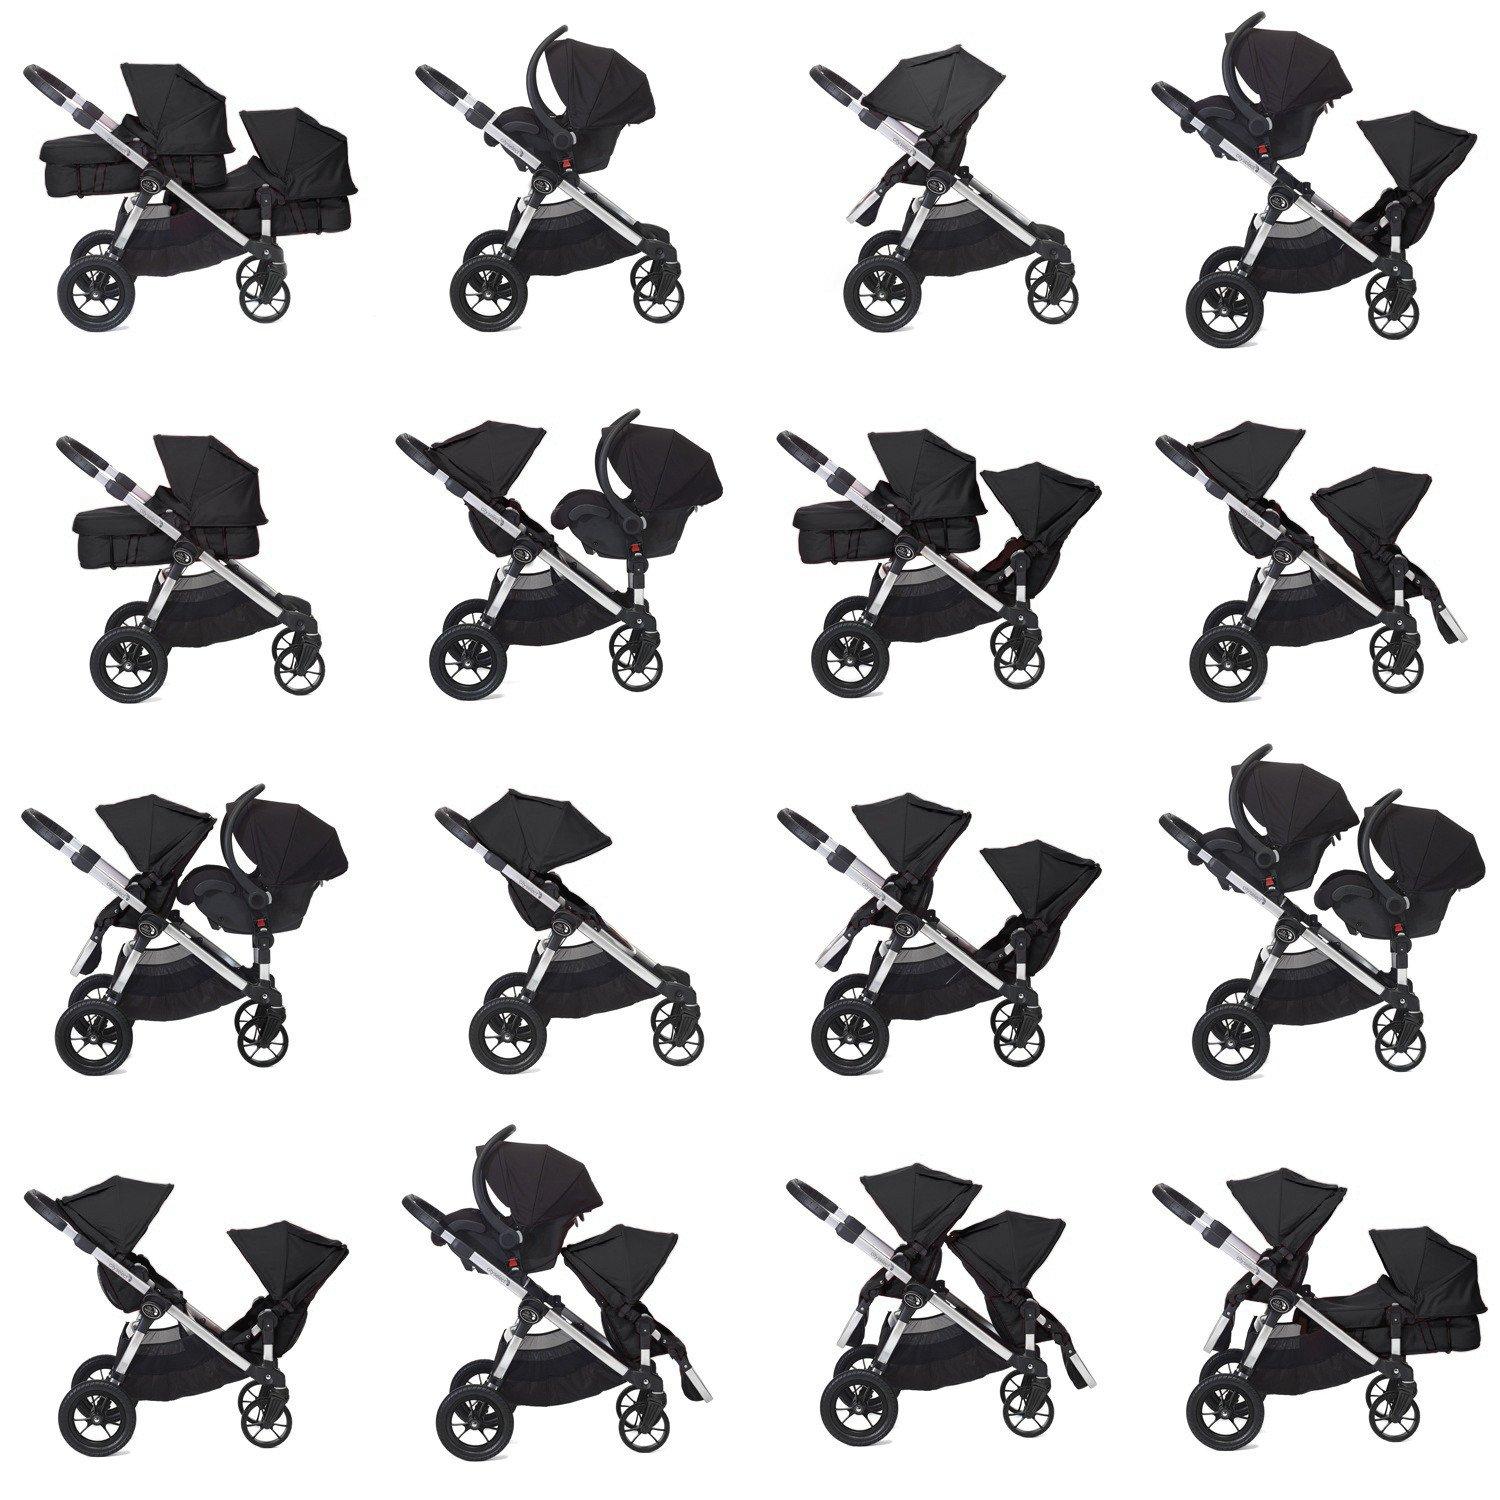 Baby Jogger City stroller reviews, questions, dimensions | pushchair experts @Strollberry